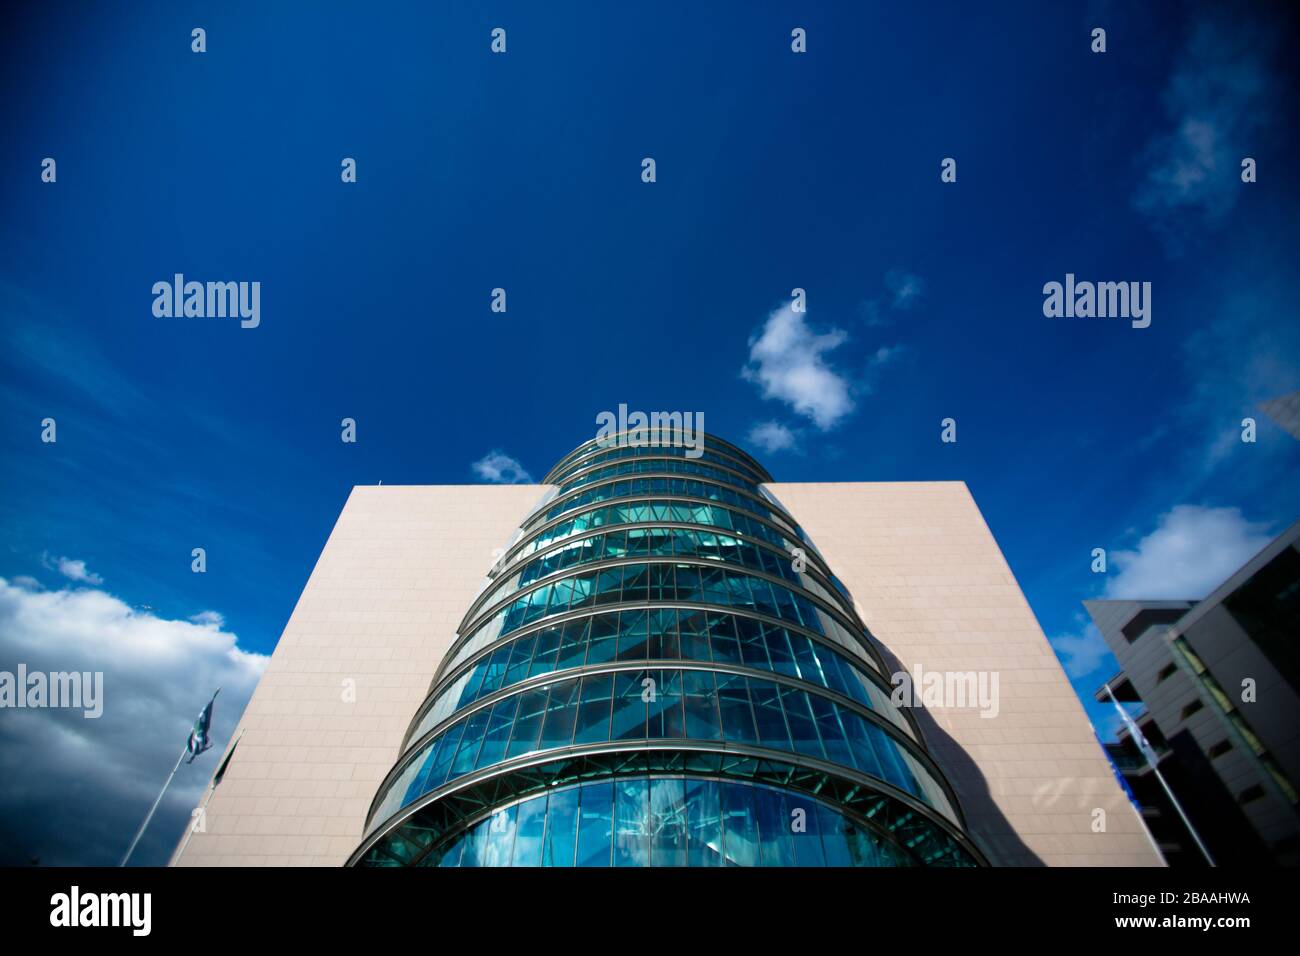 The modernist facade of the Convention Centre in Dublin, Ireland Stock Photo